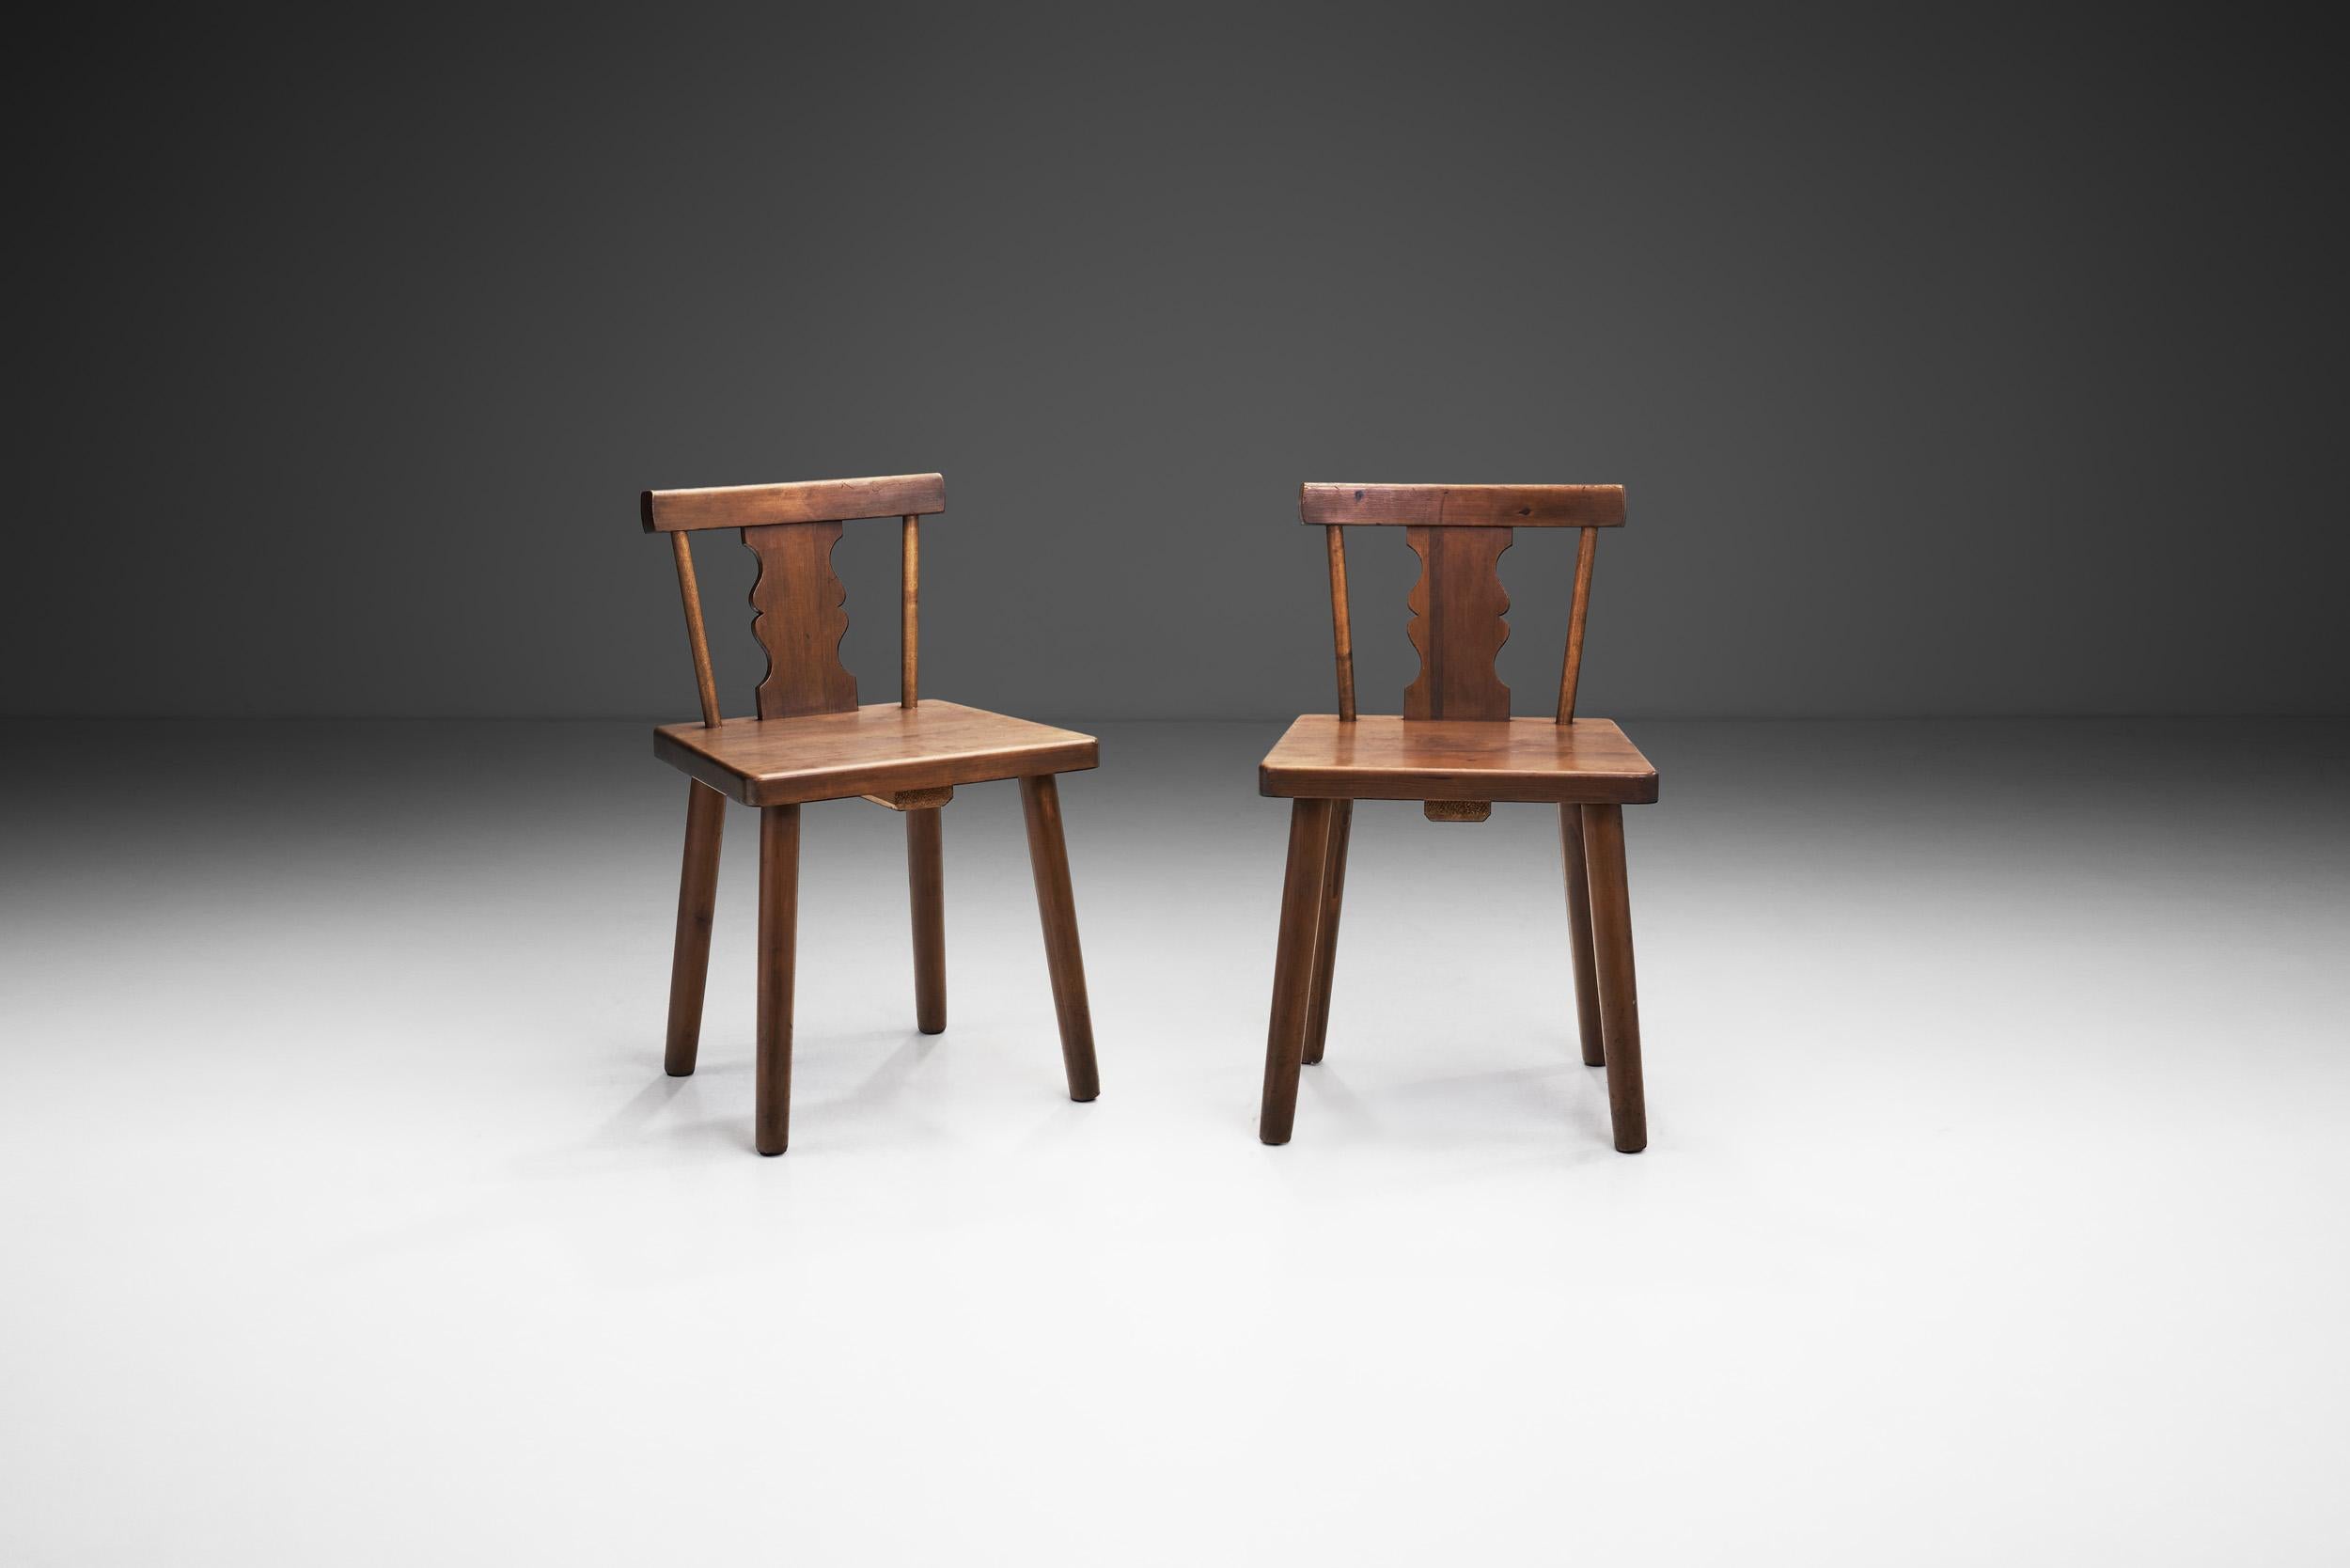 Modern Rustic Solid Pine Chairs with Carved Backs, Europe early 20th century For Sale